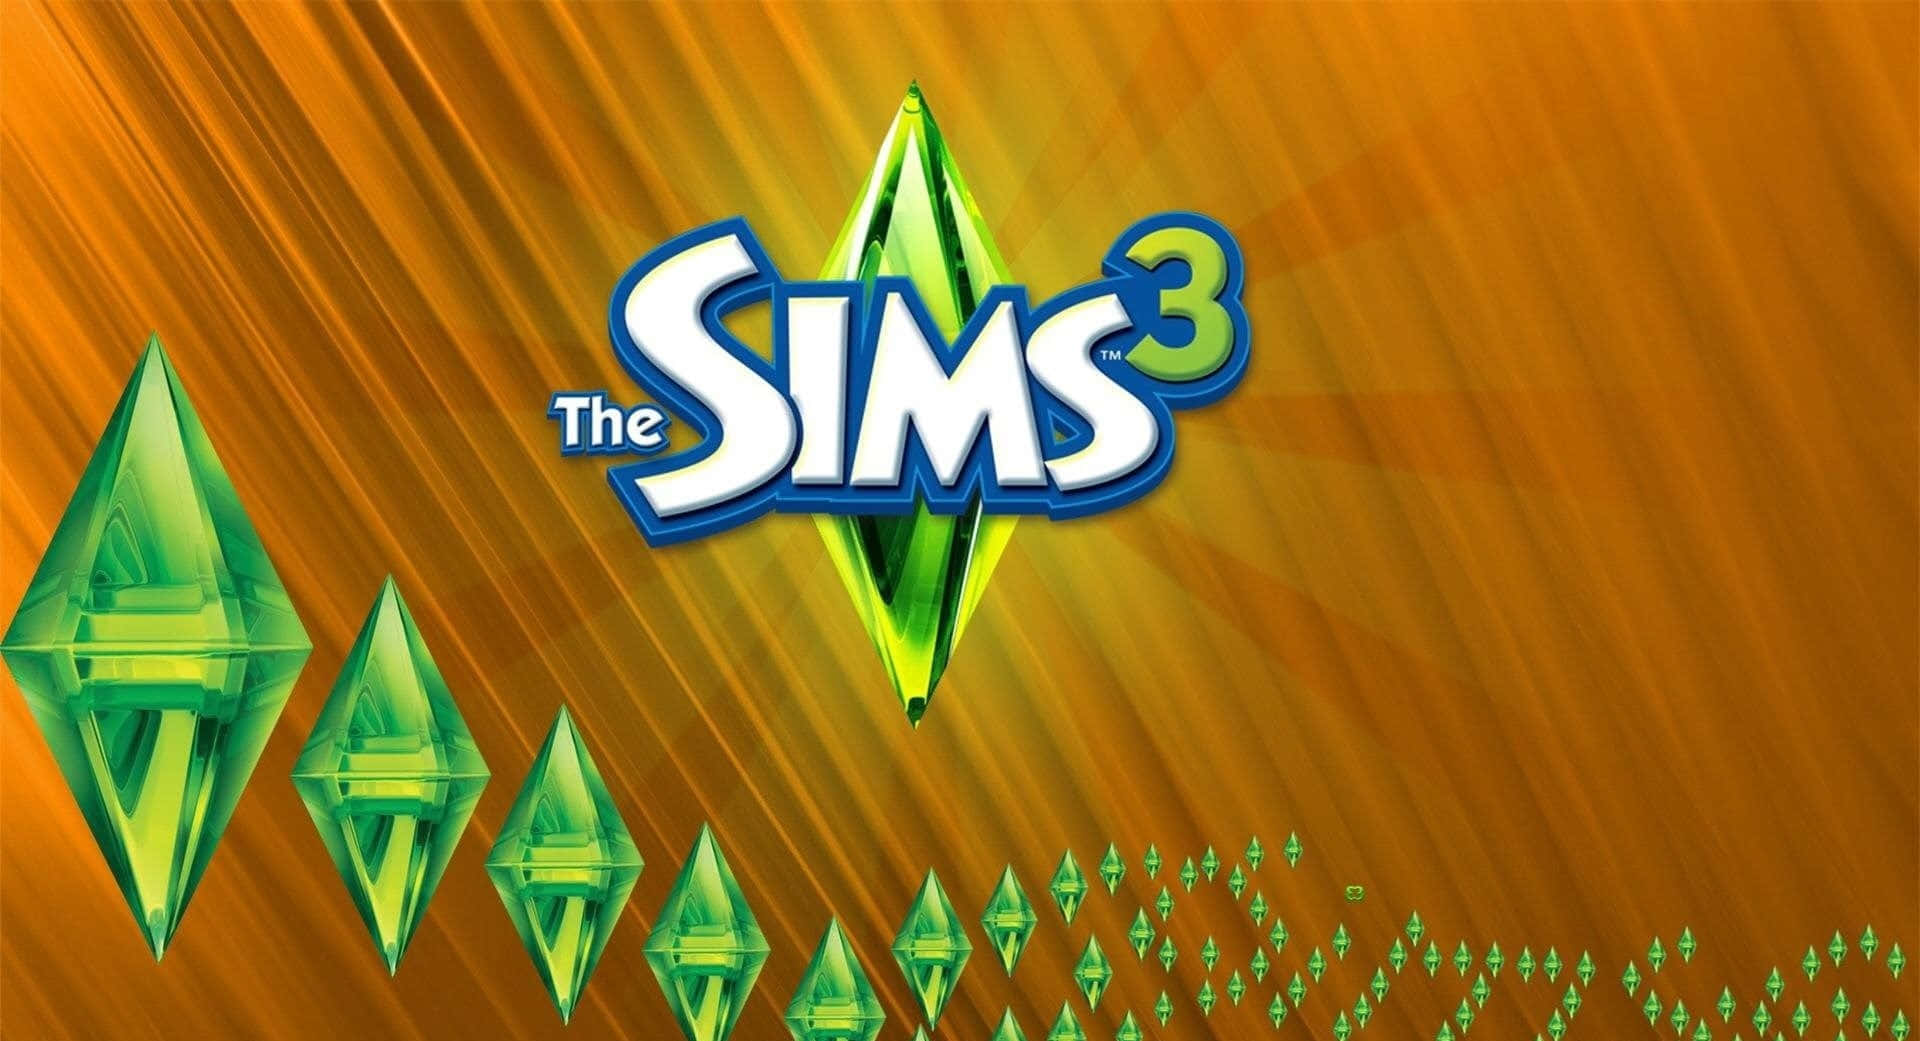 The Sims 3 Logo With Green Arrows Wallpaper